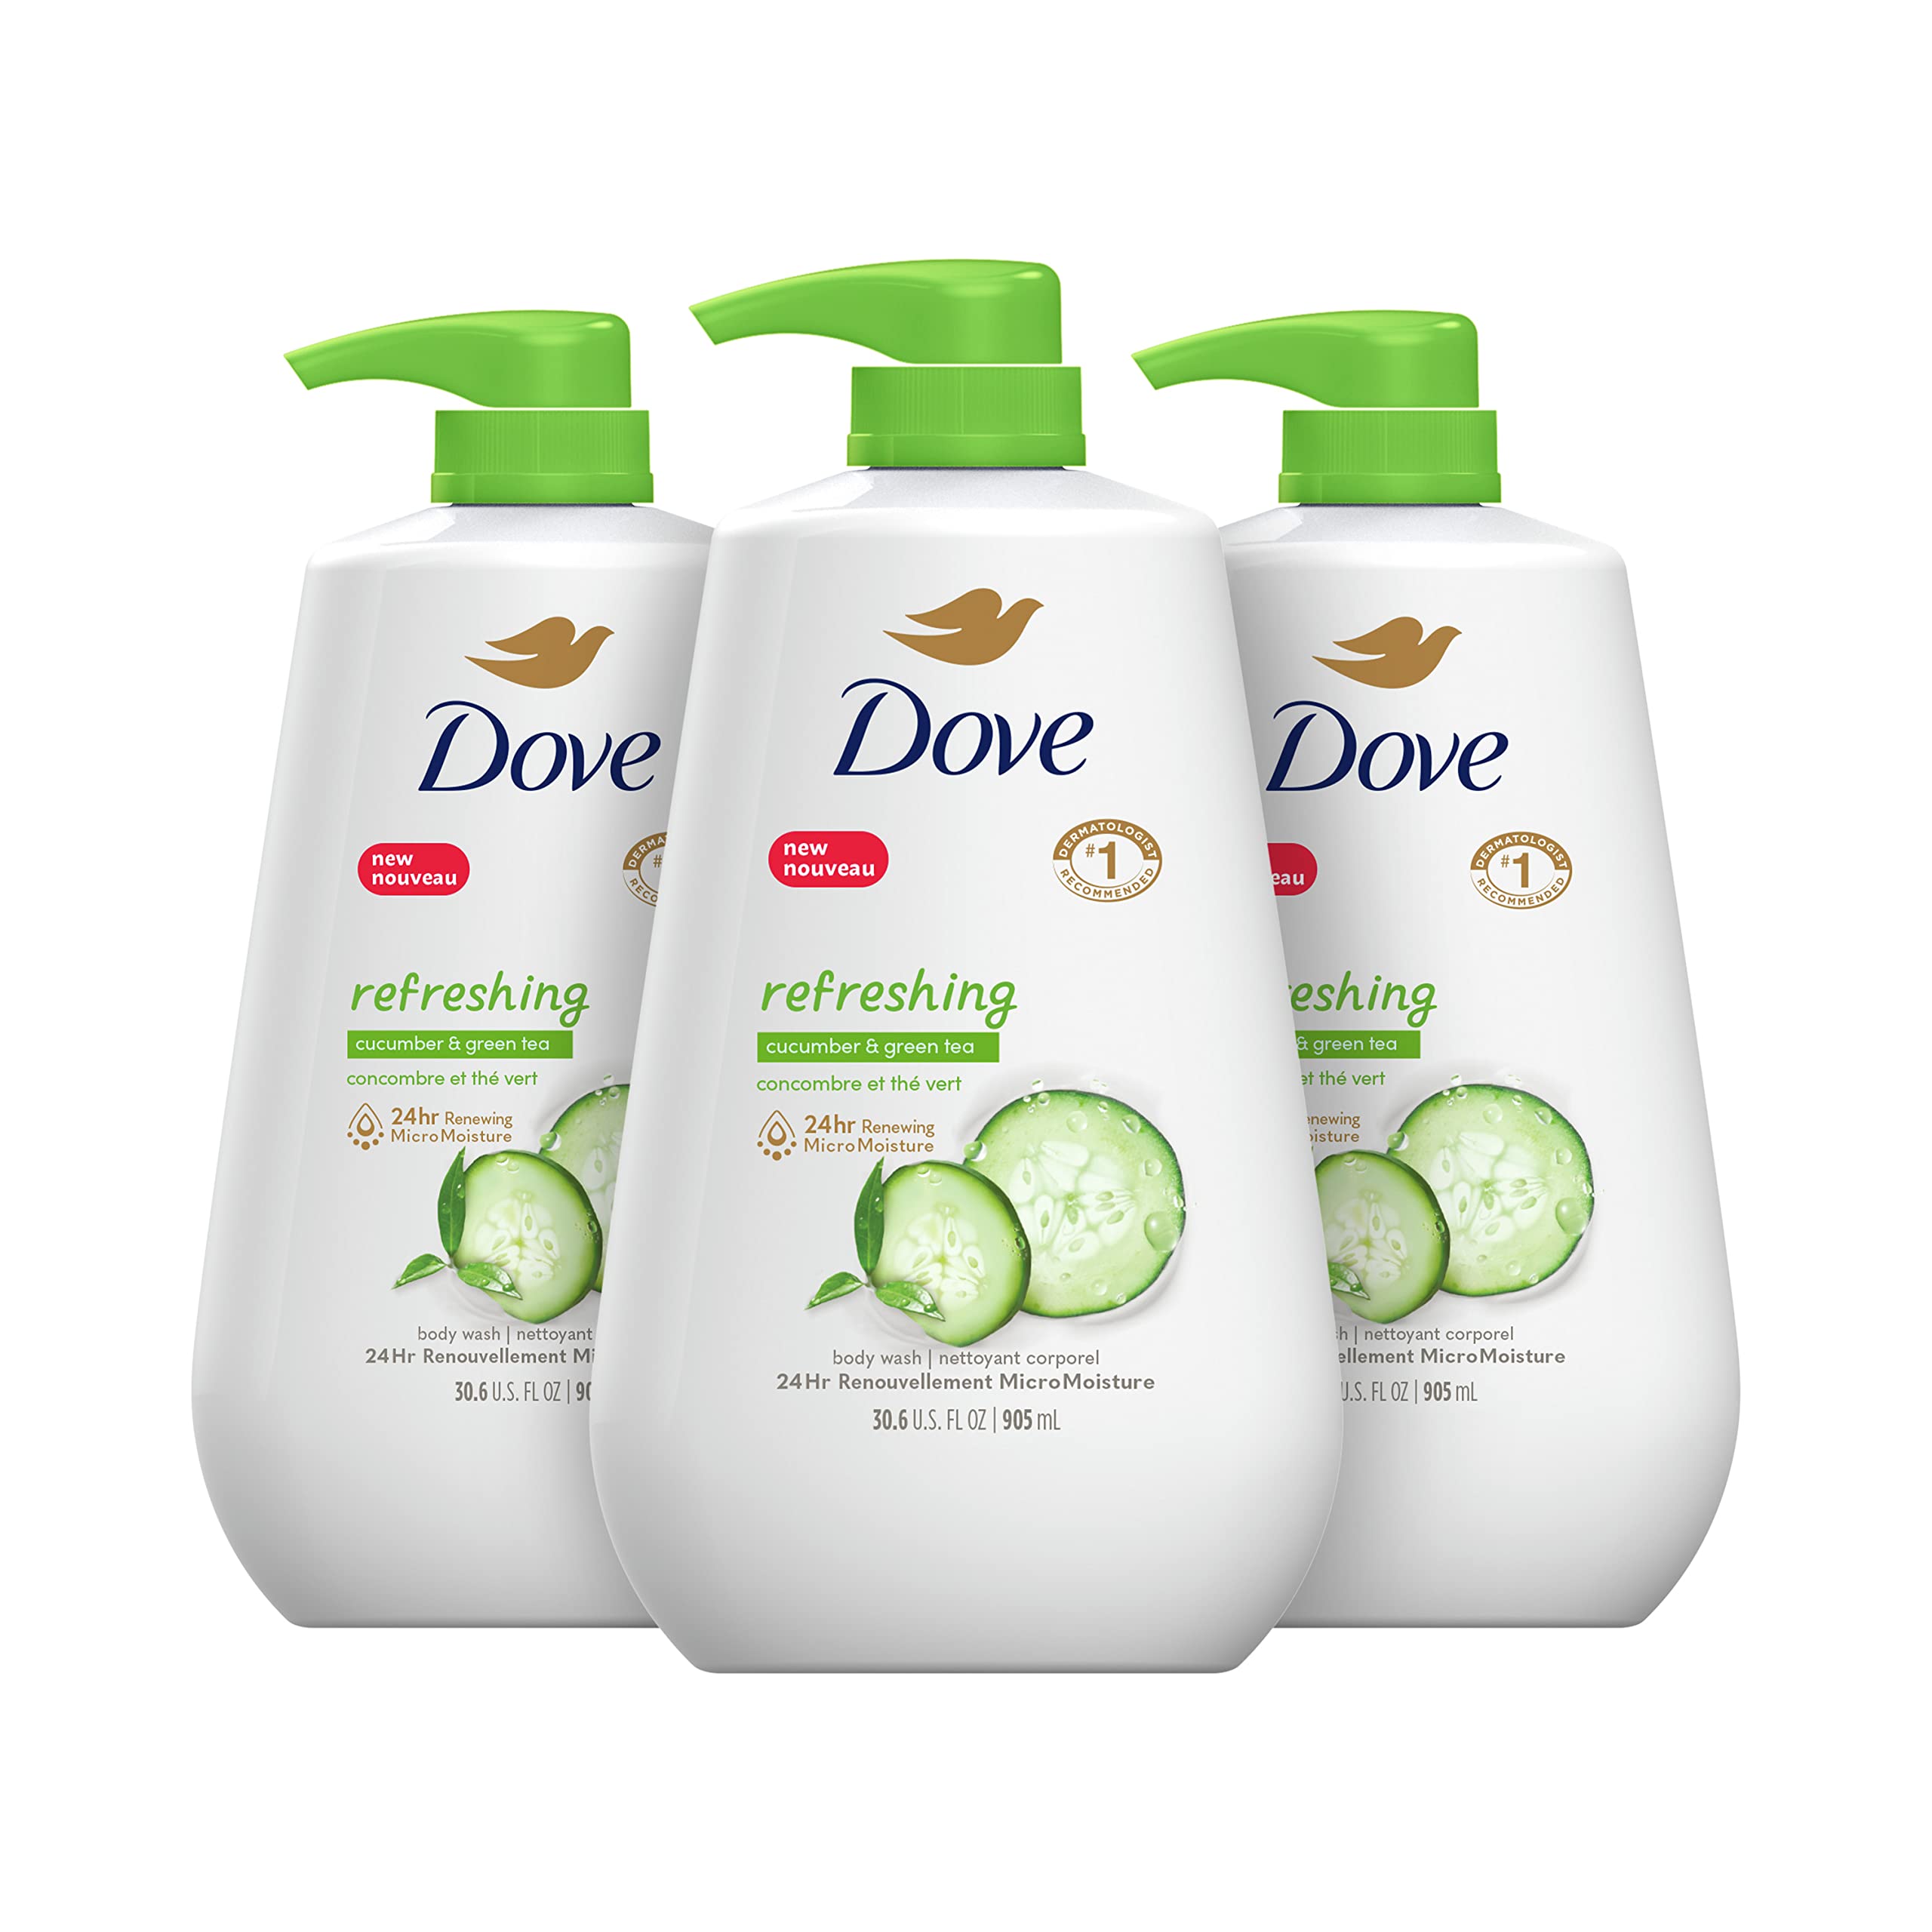 Dove Body Wash with Pump Refreshing Cucumber and Green Tea 3 Count Refreshes Skin Cleanser & Body Wash with Pump Relaxing Lavender Oil & Chamomile 3 Count for Renewed